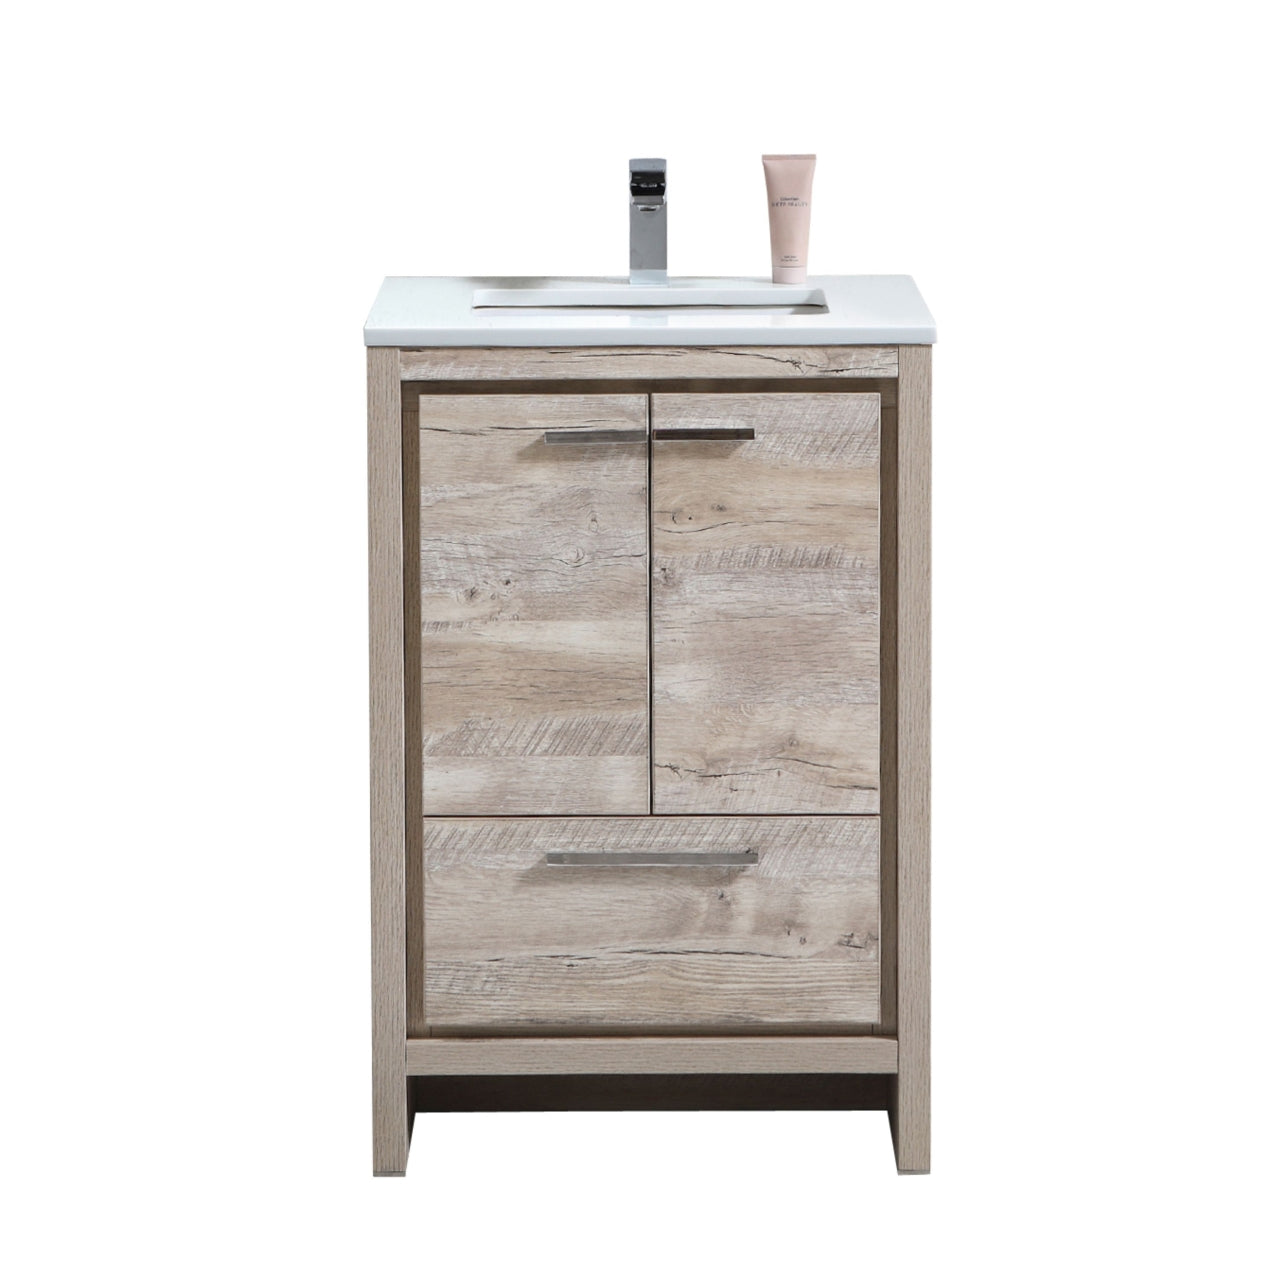 KUBEBATH Dolce AD624NW 24" Single Bathroom Vanity in Nature Wood with White Quartz, Rectangle Sink, Front View